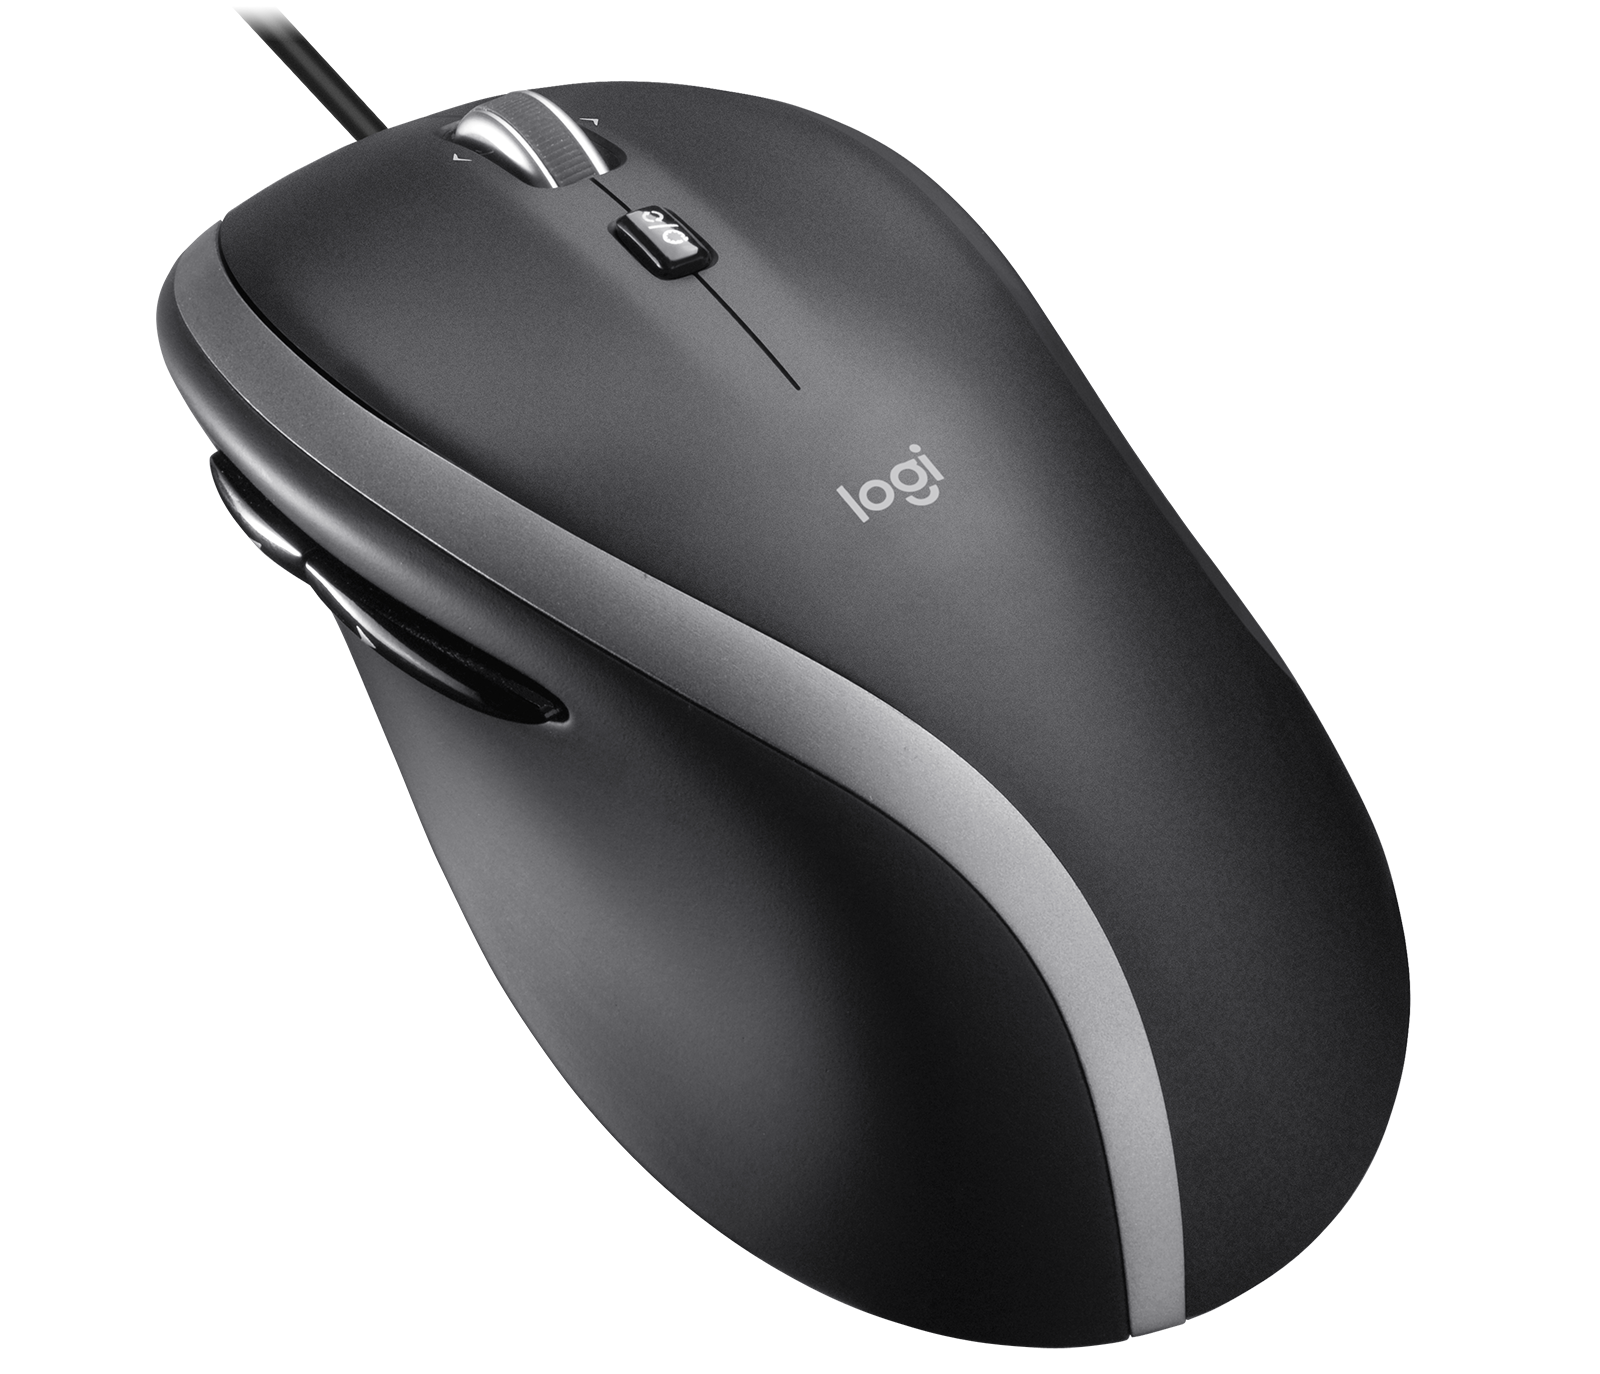 Image of M500s ADVANCED CORDED MOUSE Full-Size mouse with a contoured design, hyper-fast wheel and 7 customizable buttons - Black